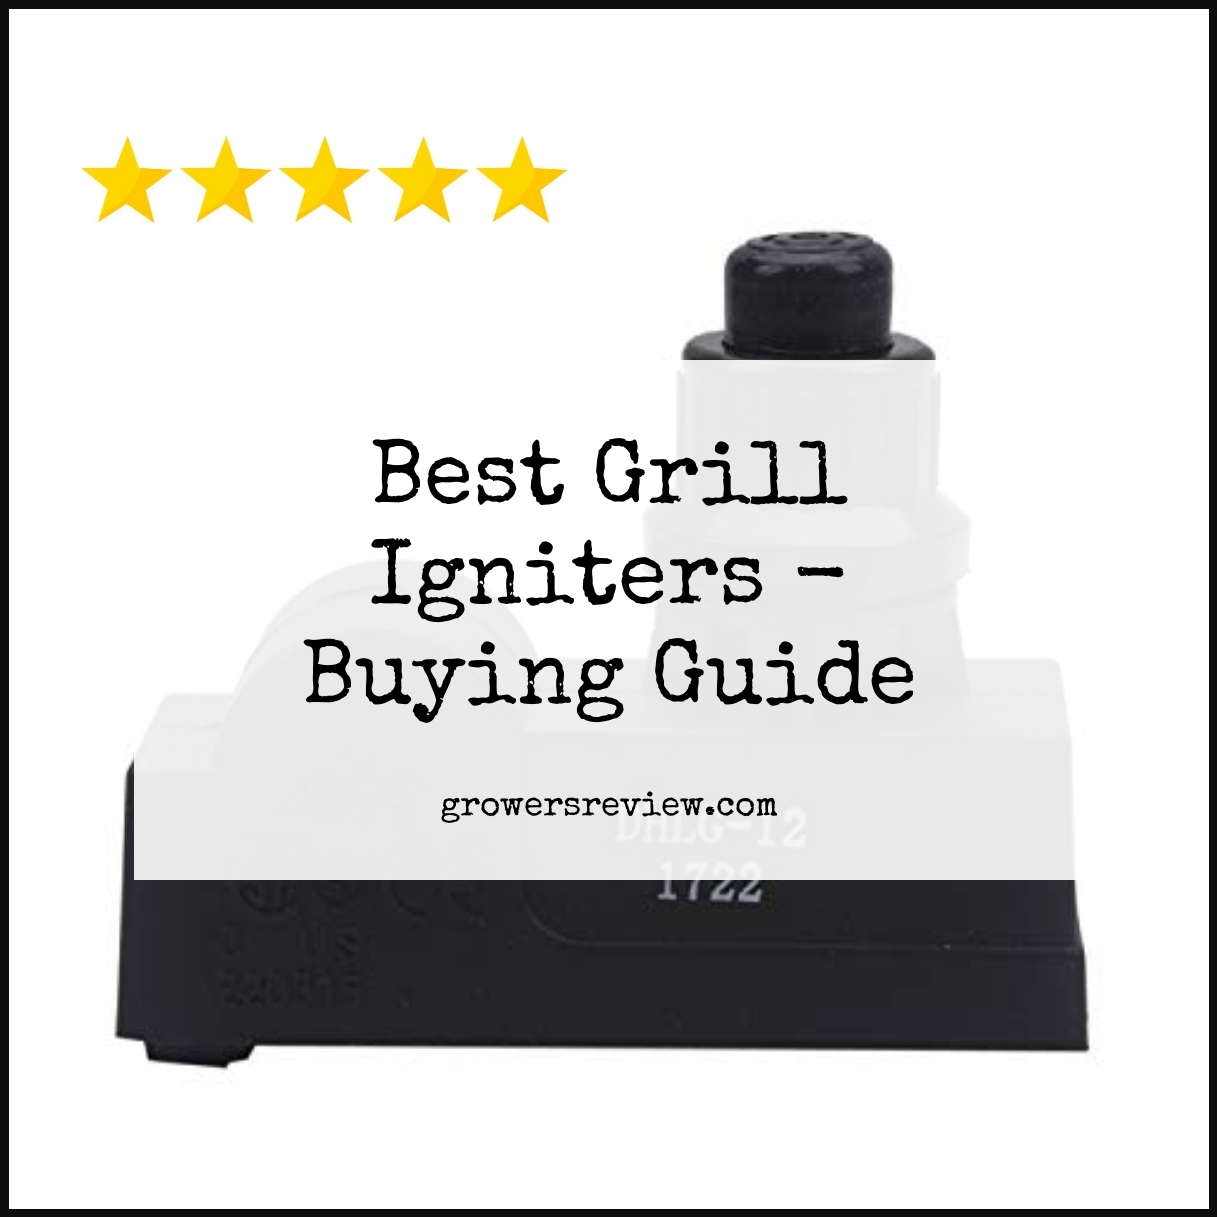 Best Grill Igniters - Buying Guide